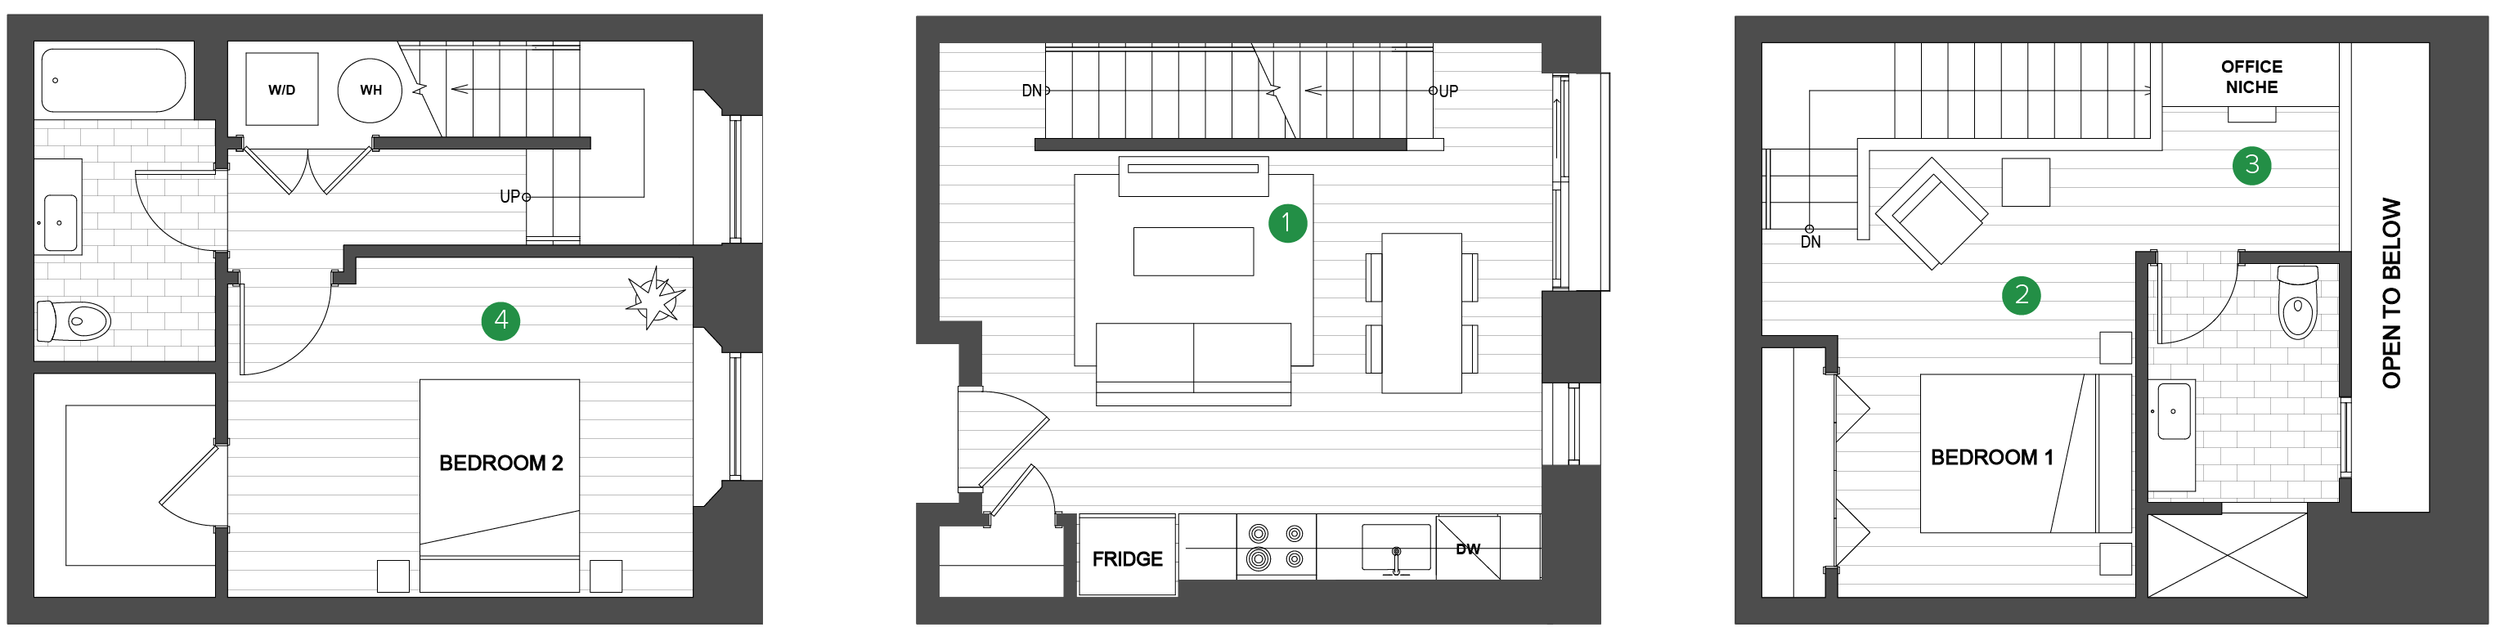   UNIT 05  2 BEDROOM / 2 BATH TRIPLEX +OFFICE NICHE 1238 SQUARE FEET   REQUEST INFORMATION / APPLY FOR THIS UNIT   